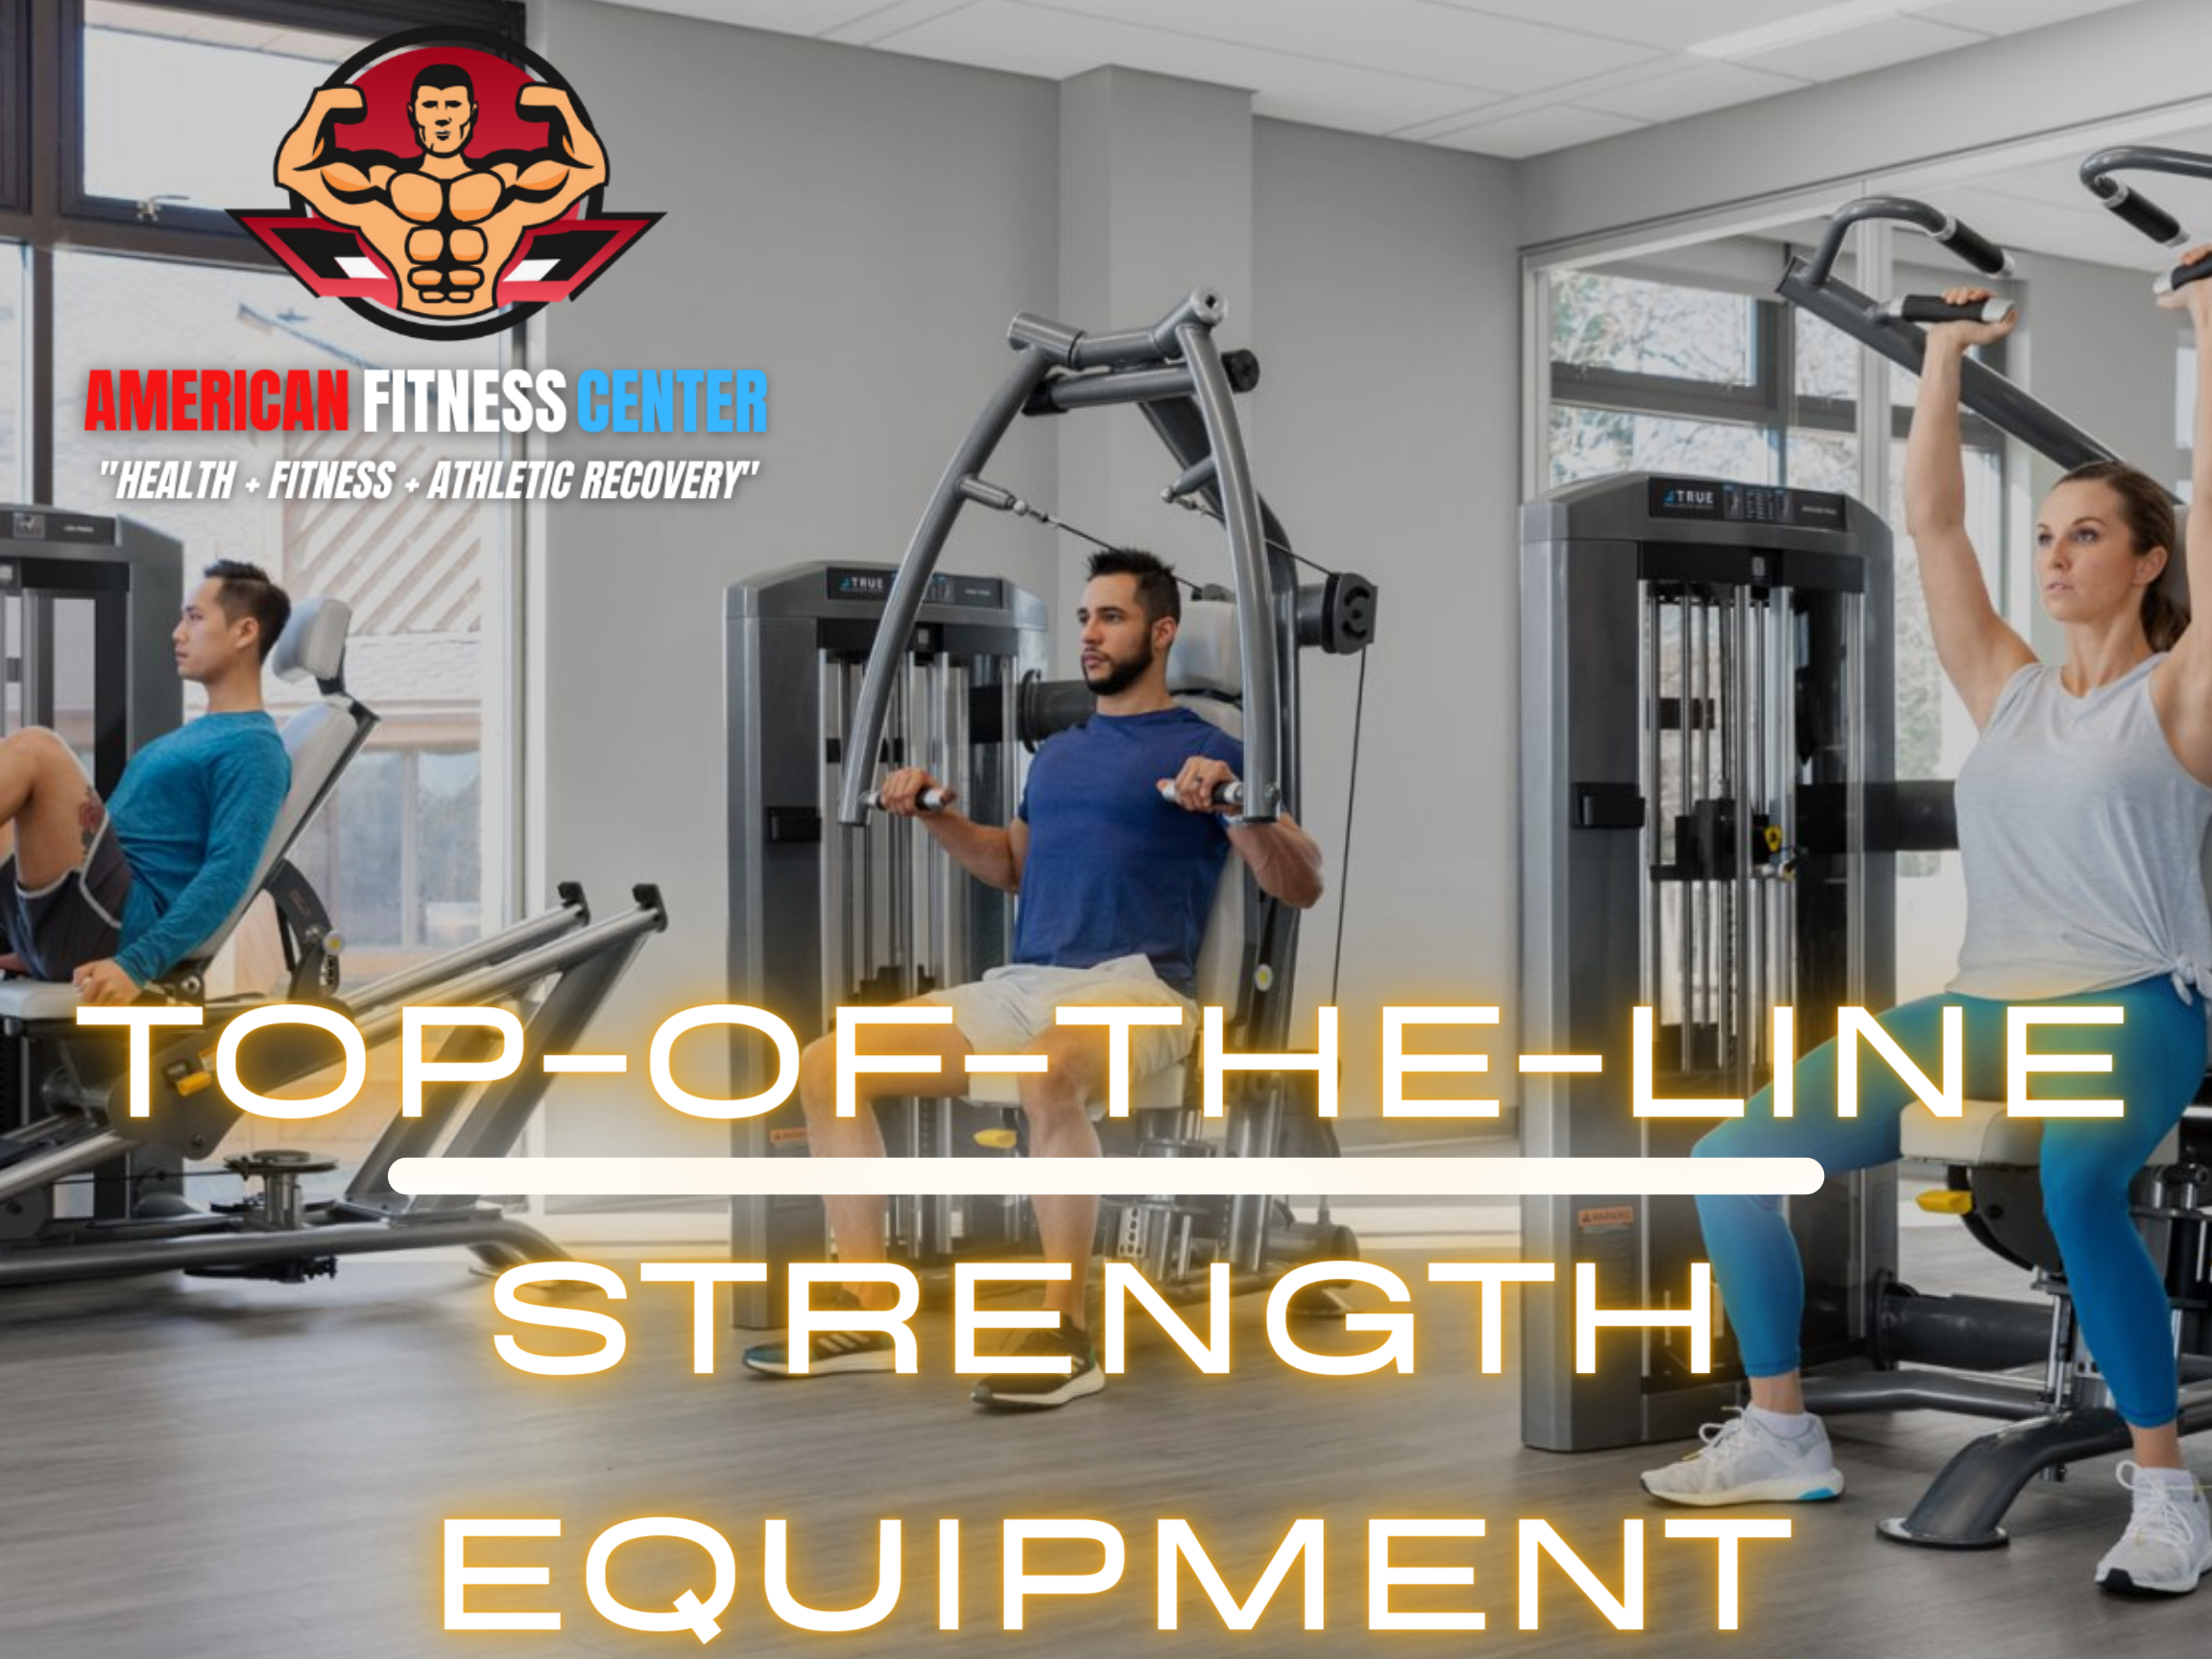 24-Hour-Gym-With-Top-Notch-Strength-Equipment-in-Snellville-GA-American-Fitness-Center-Snellville